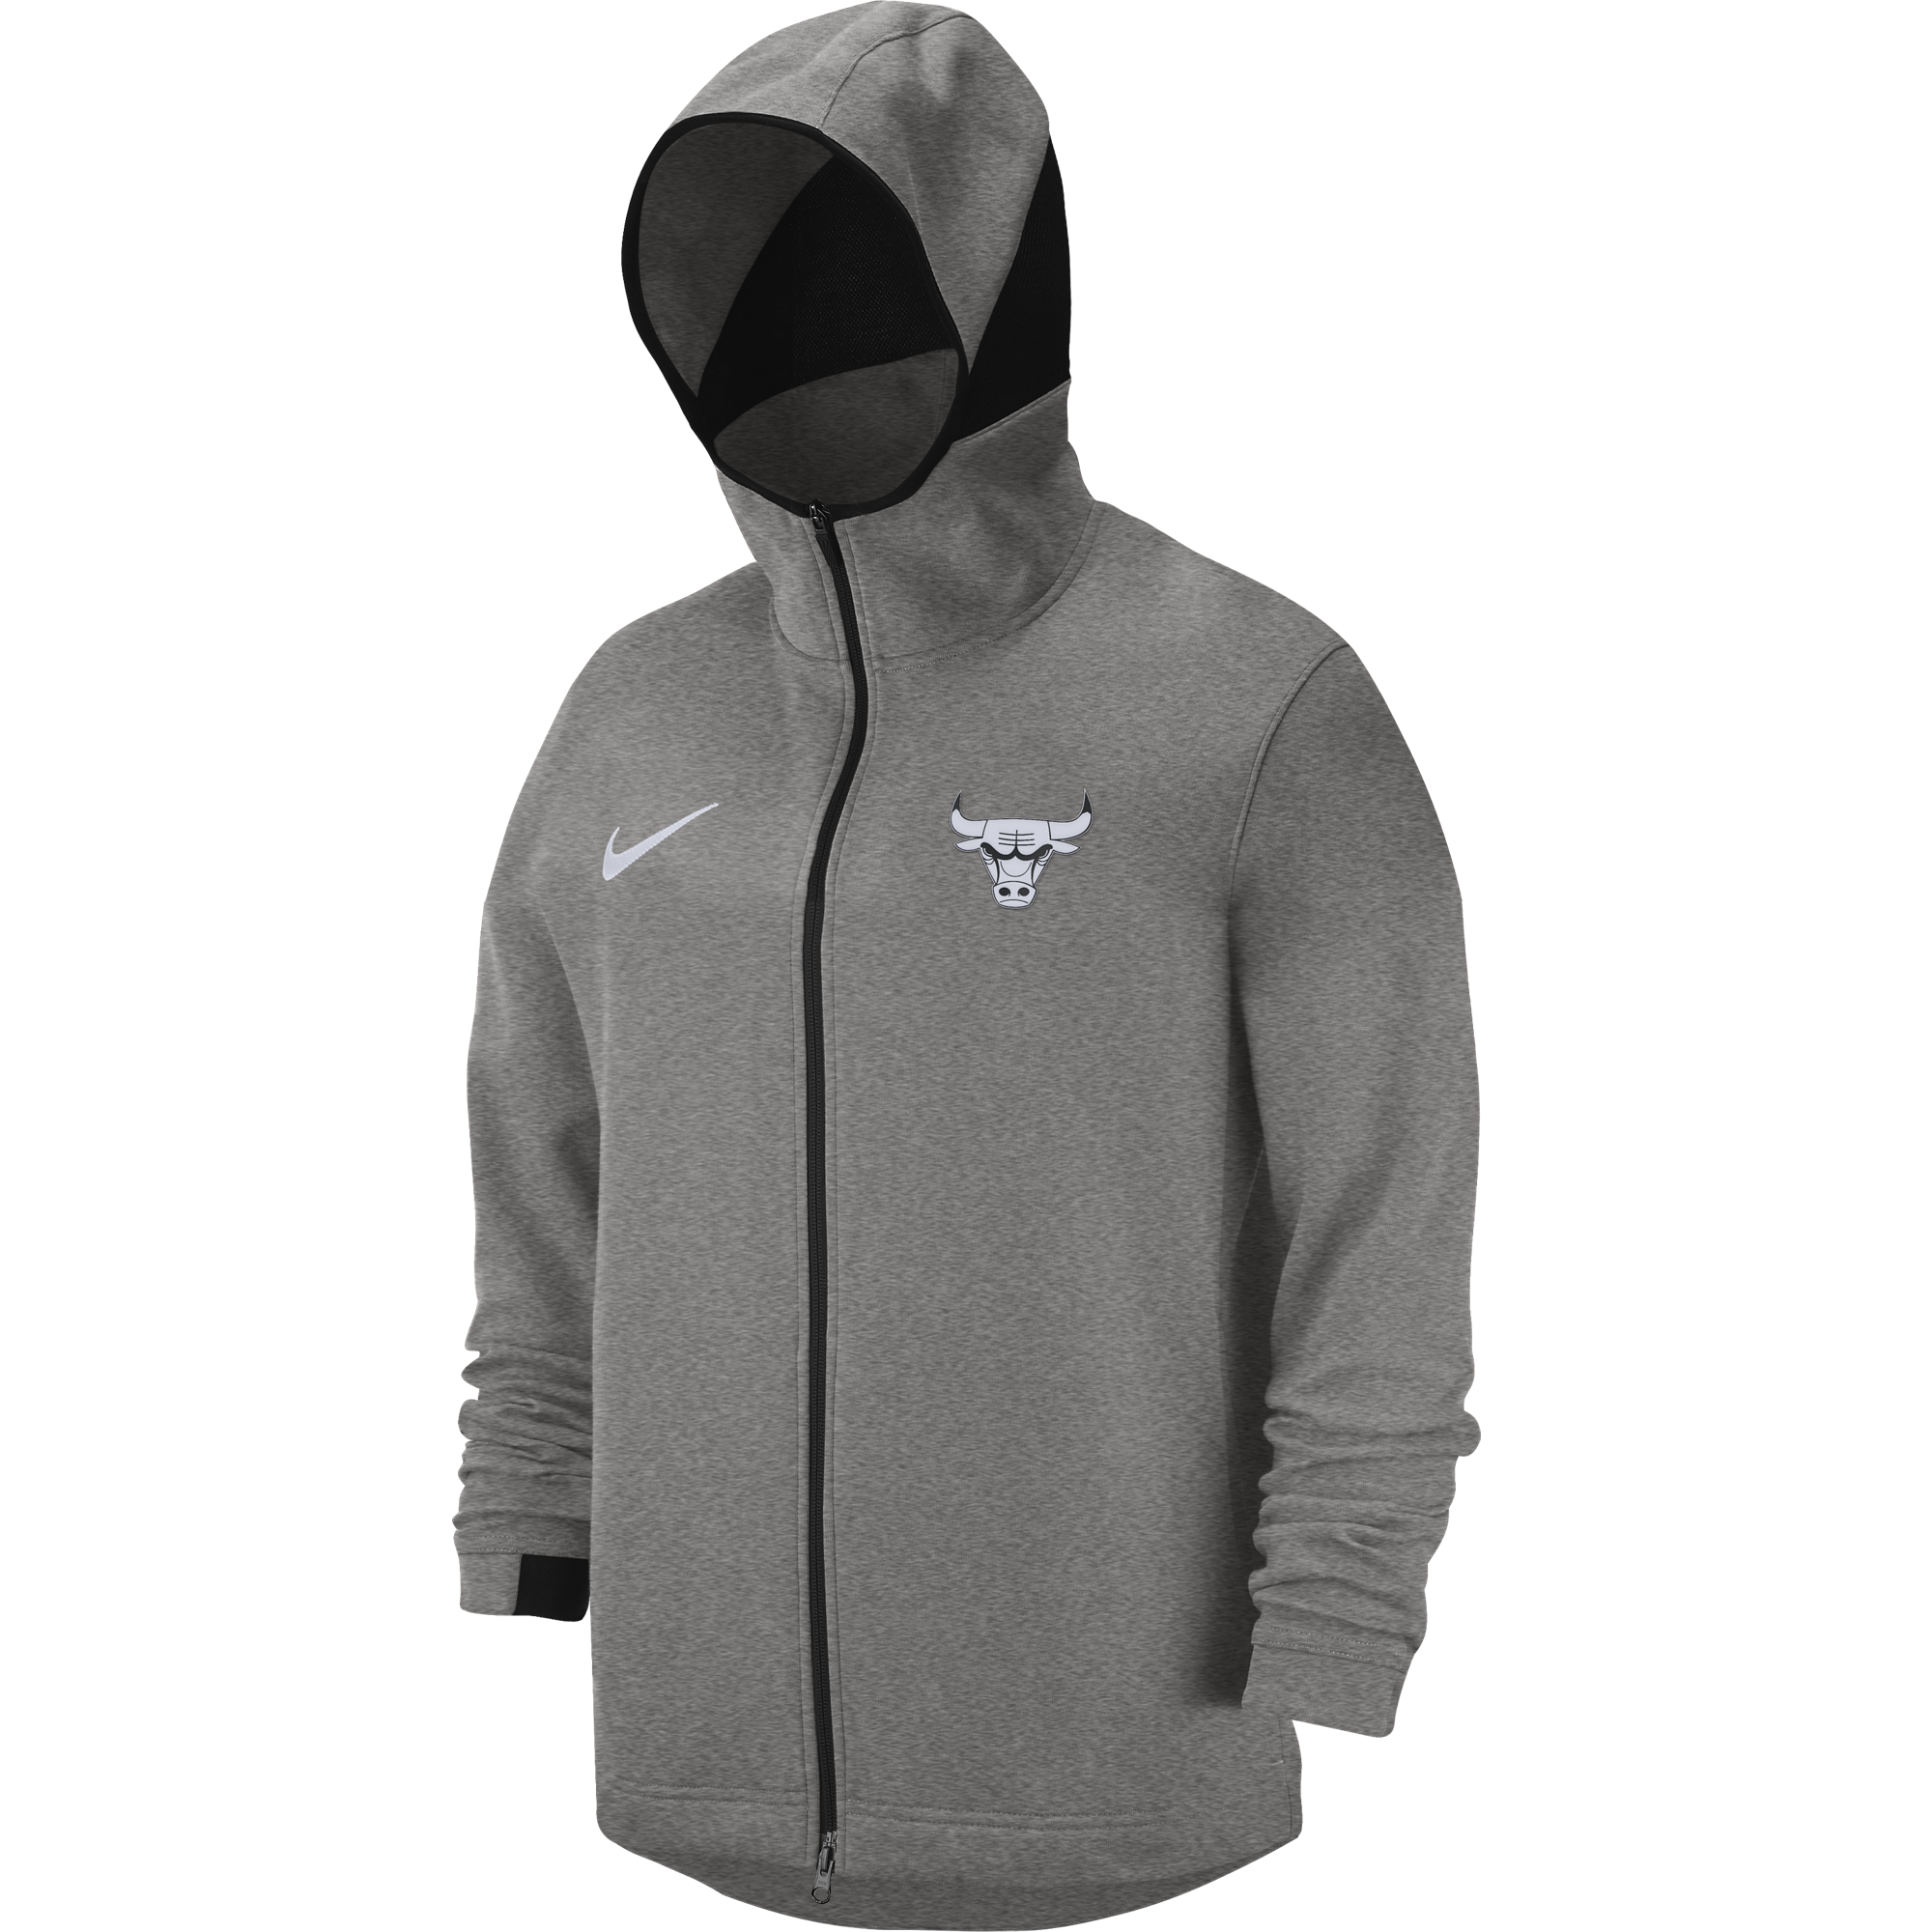 Nike NBA 2020 City Edition Showtime Hoodie Review 